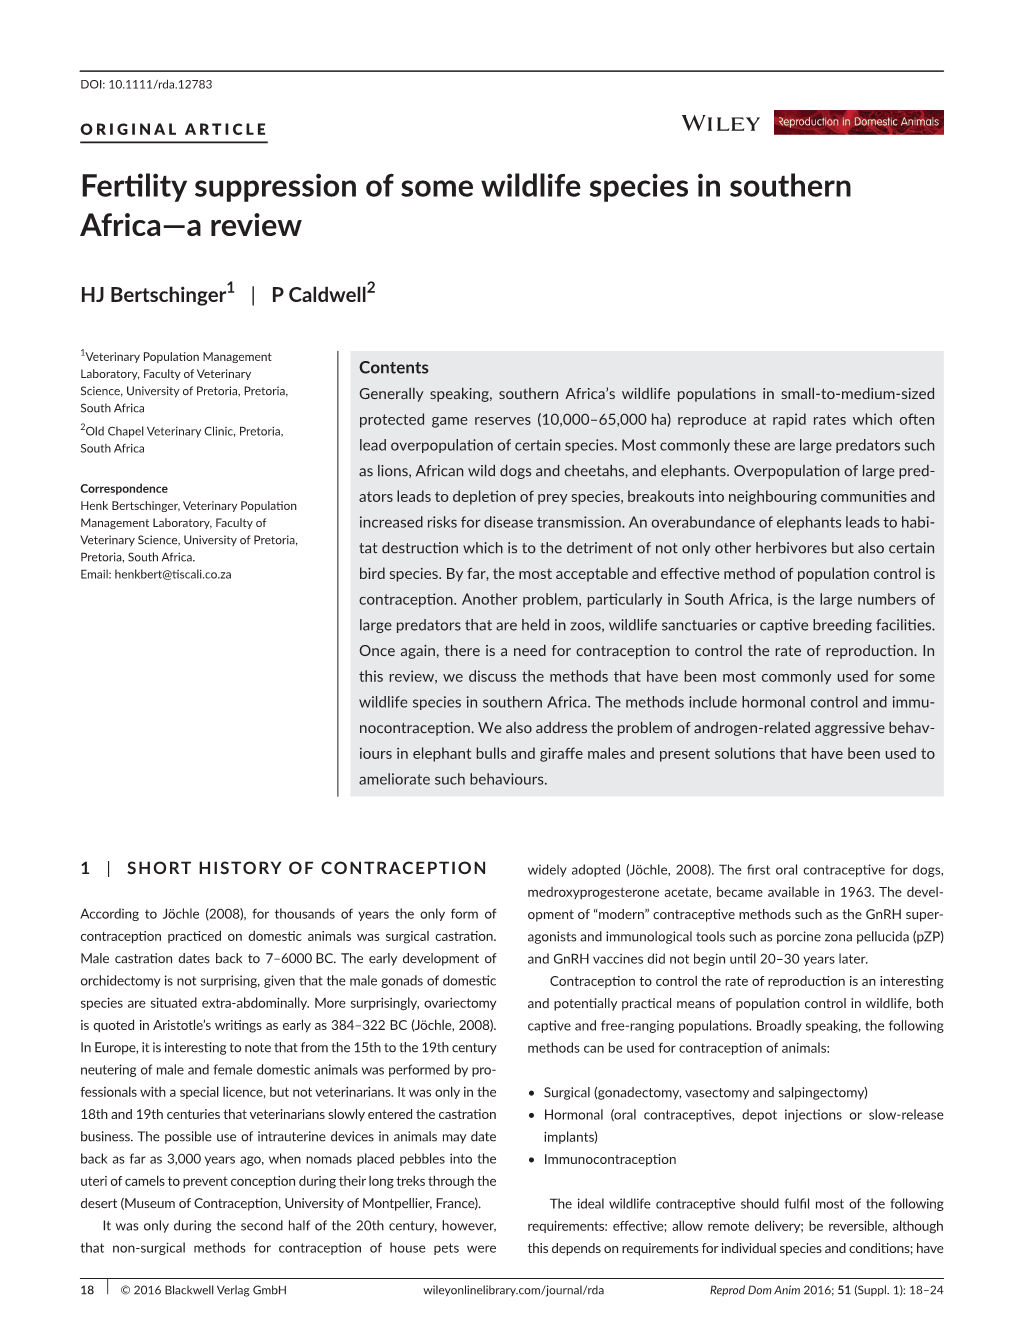 Fertility Suppression of Some Wildlife Species in Southern Africa&#X2014